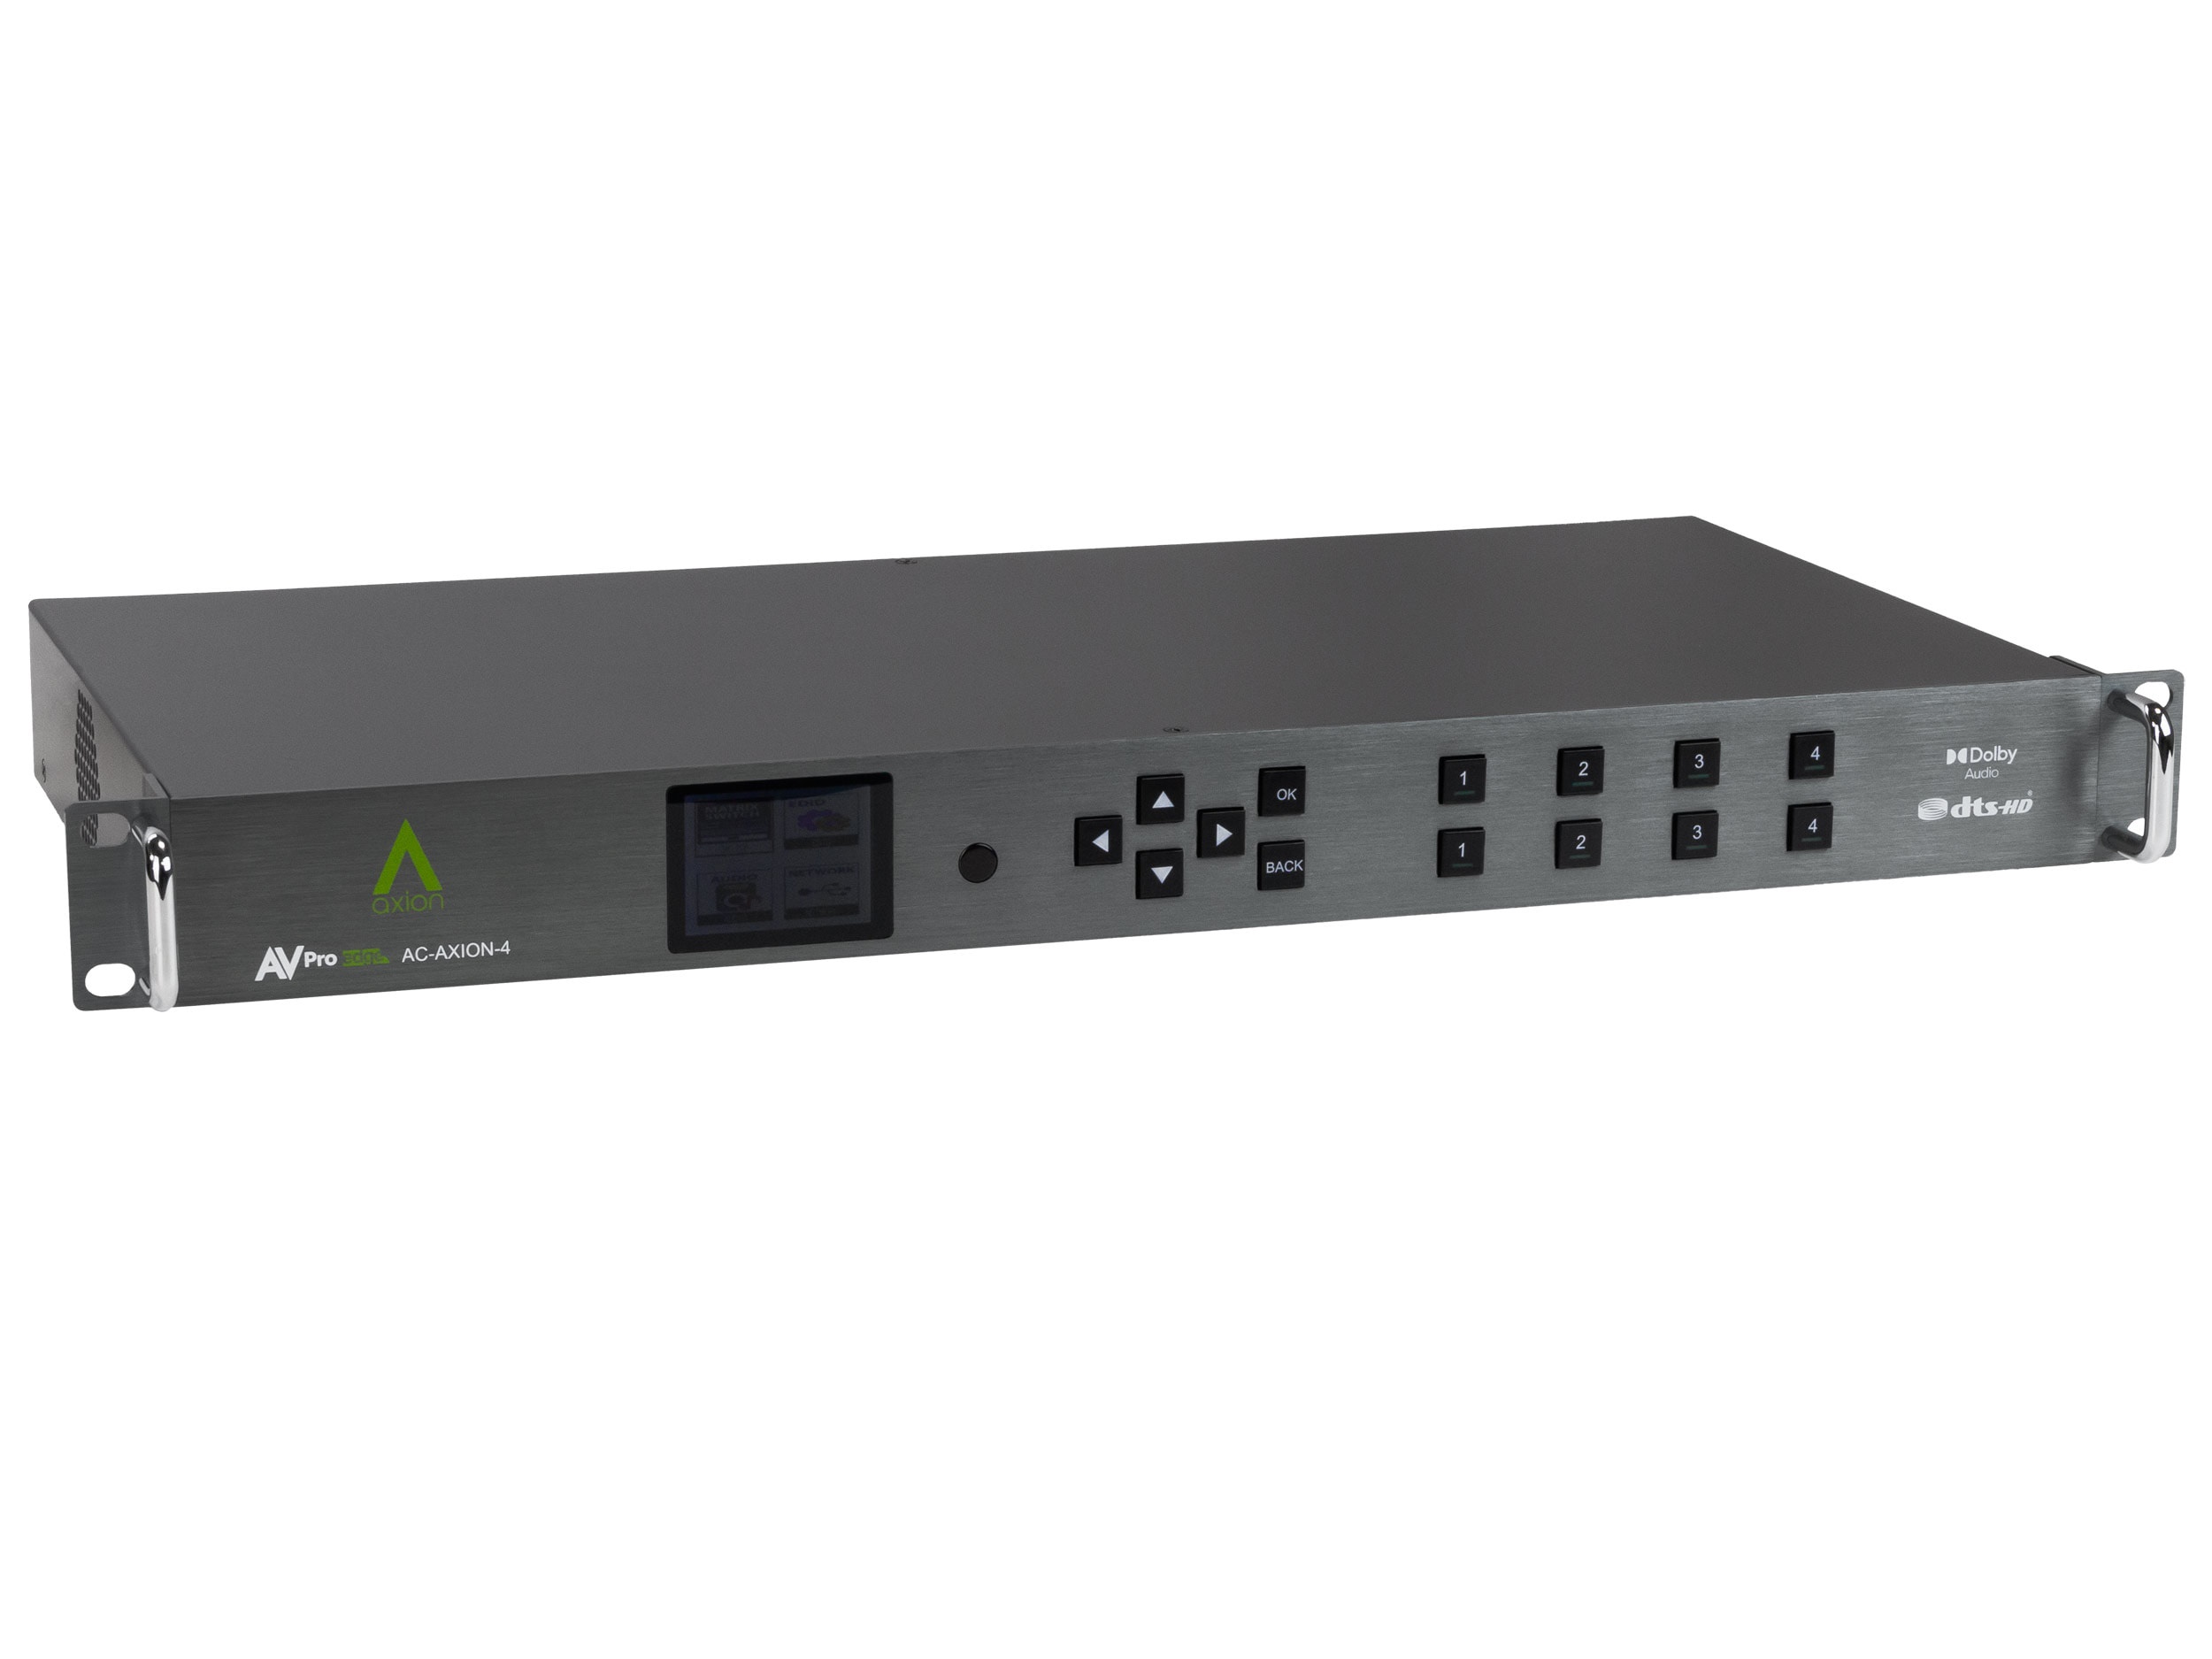 AVPro Edge AC-AXION-4 4 HDMI Input/4 HDBaseT/HDMI Output Matrix Switcher with Dolby Atmos and DTS Audio Downmixing